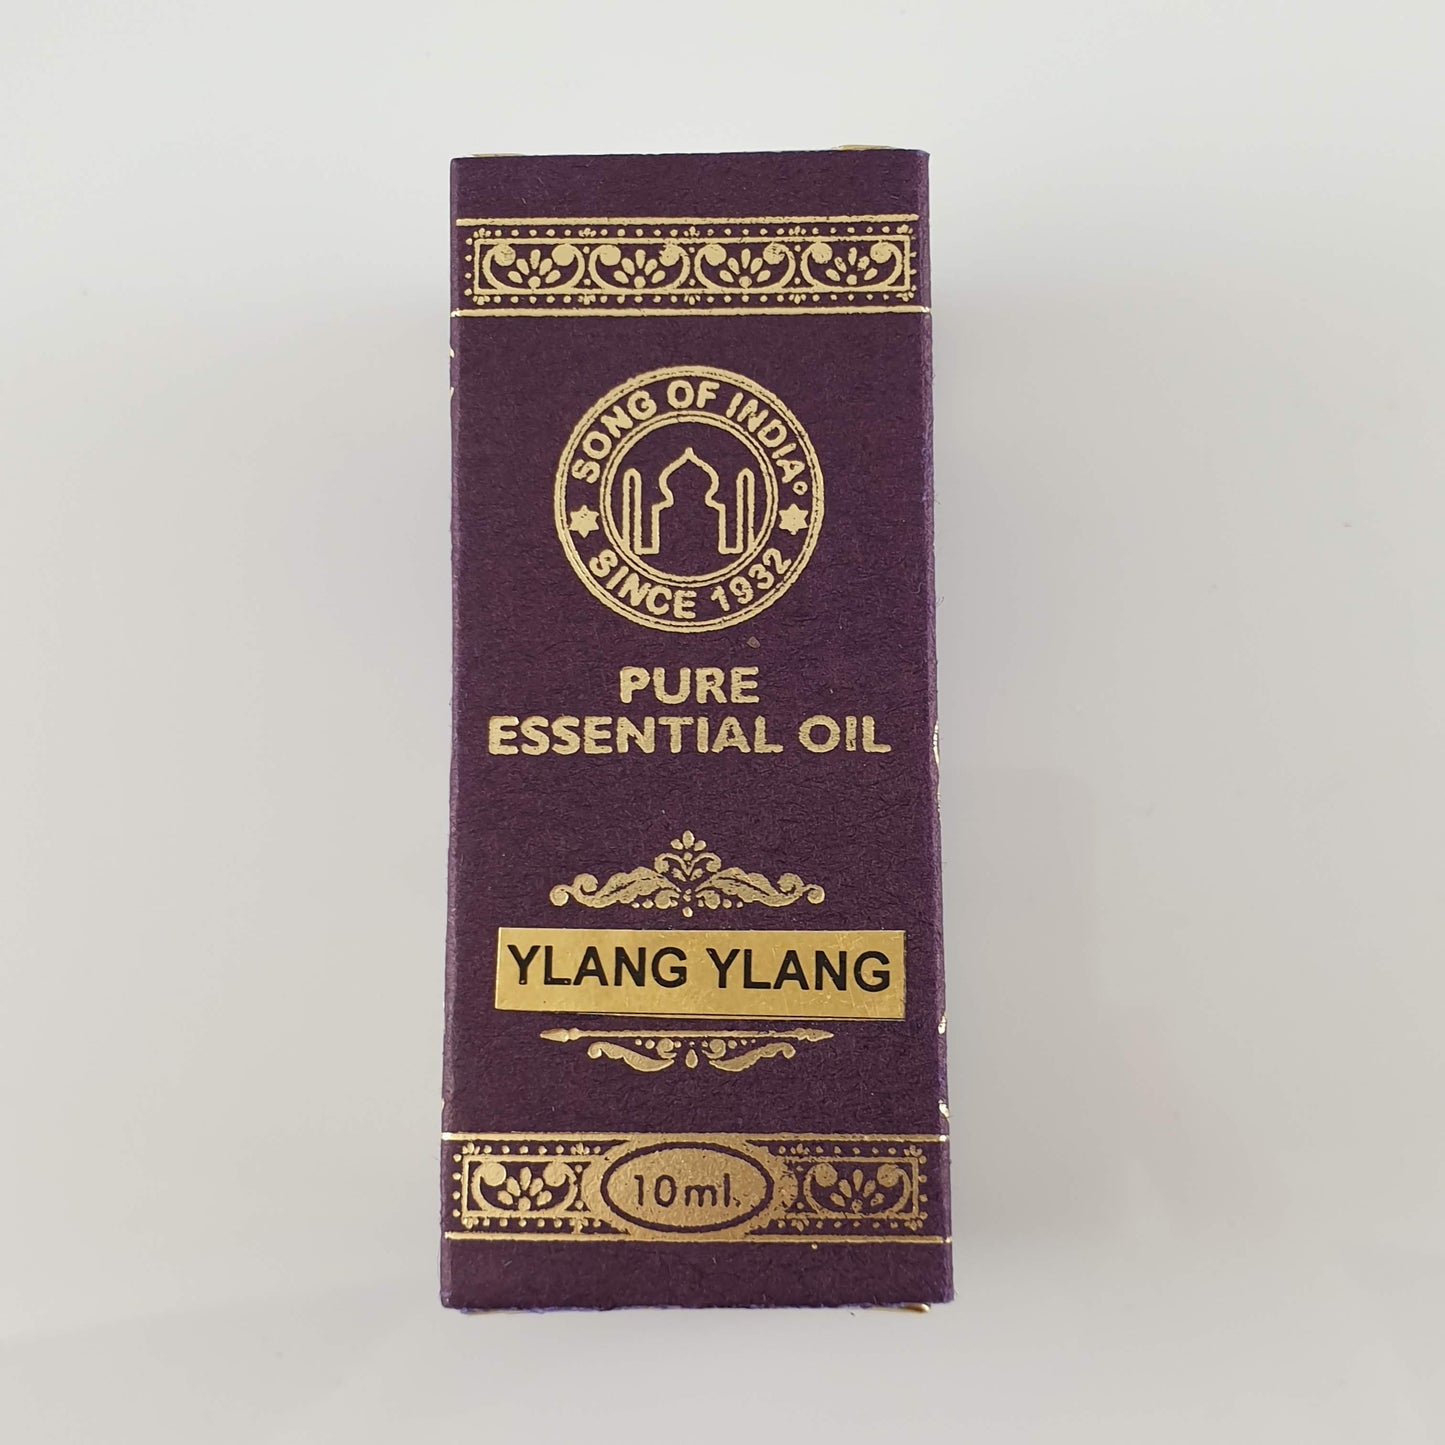 Song of India Essential Oil - Ylang Ylang 10ml - Rivendell Shop